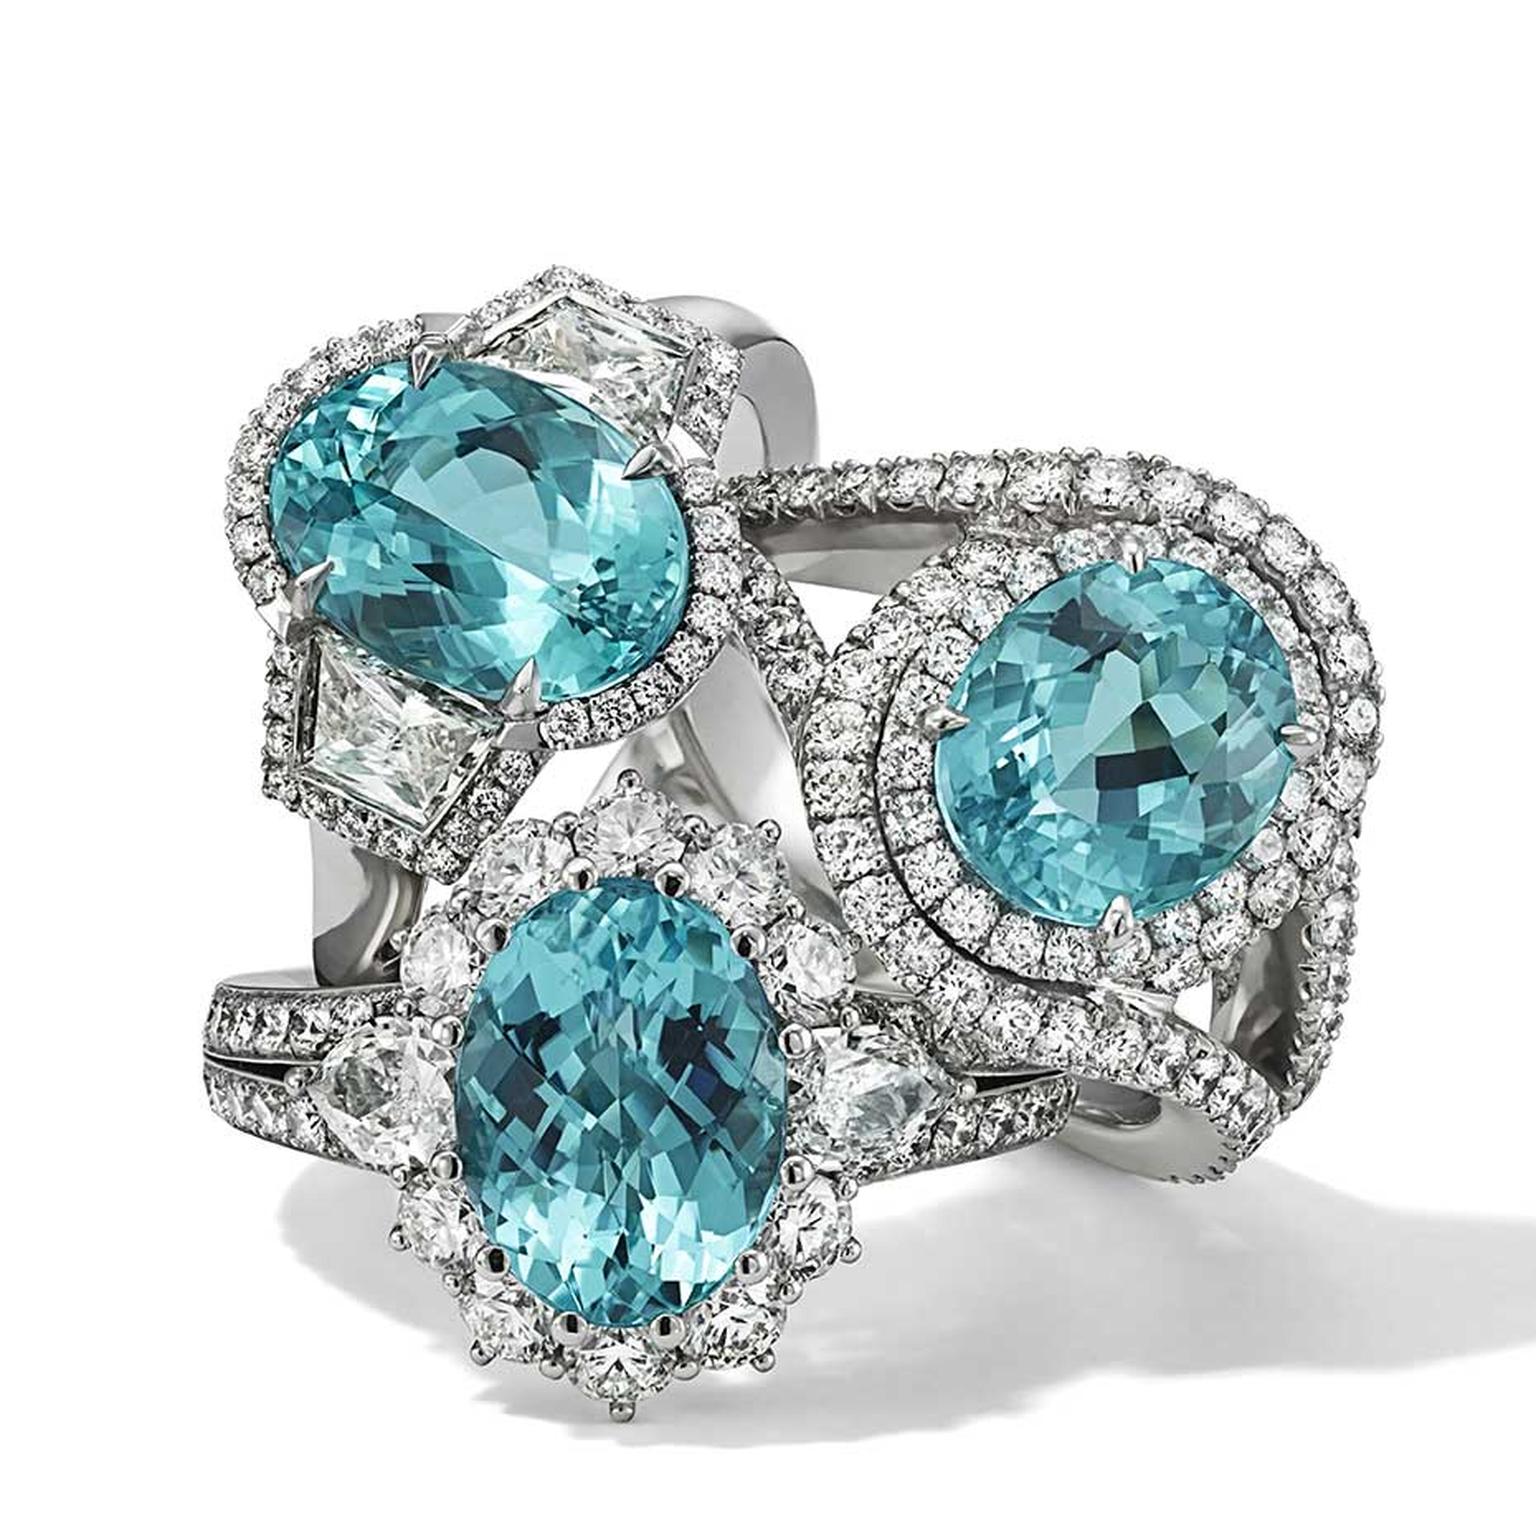 Paraiba tourmalines: an electric story that stretches all the way from Brazil to Africa